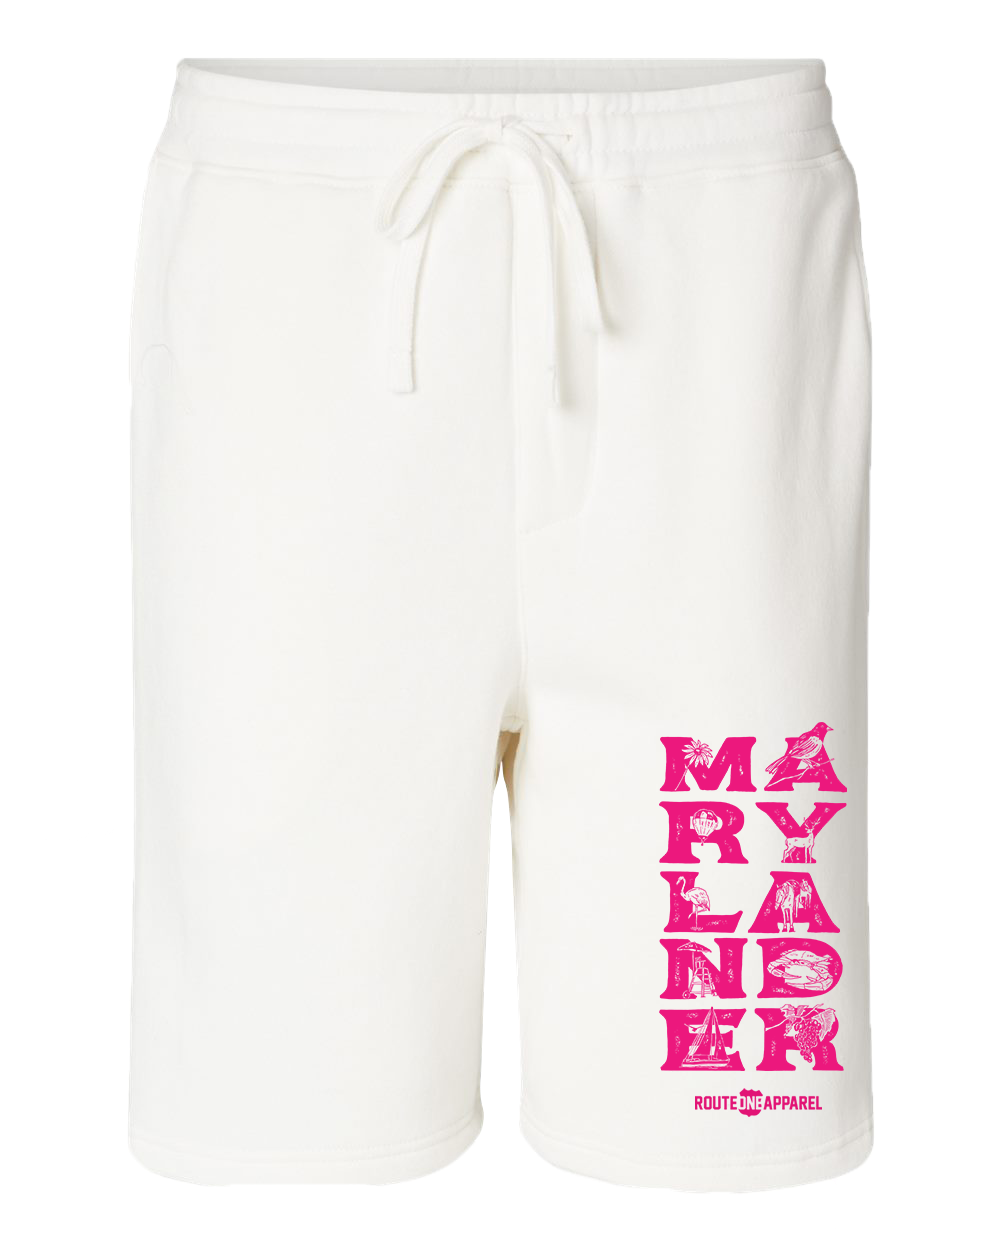 Marylander Stacked (White) / Sweatshorts - Route One Apparel